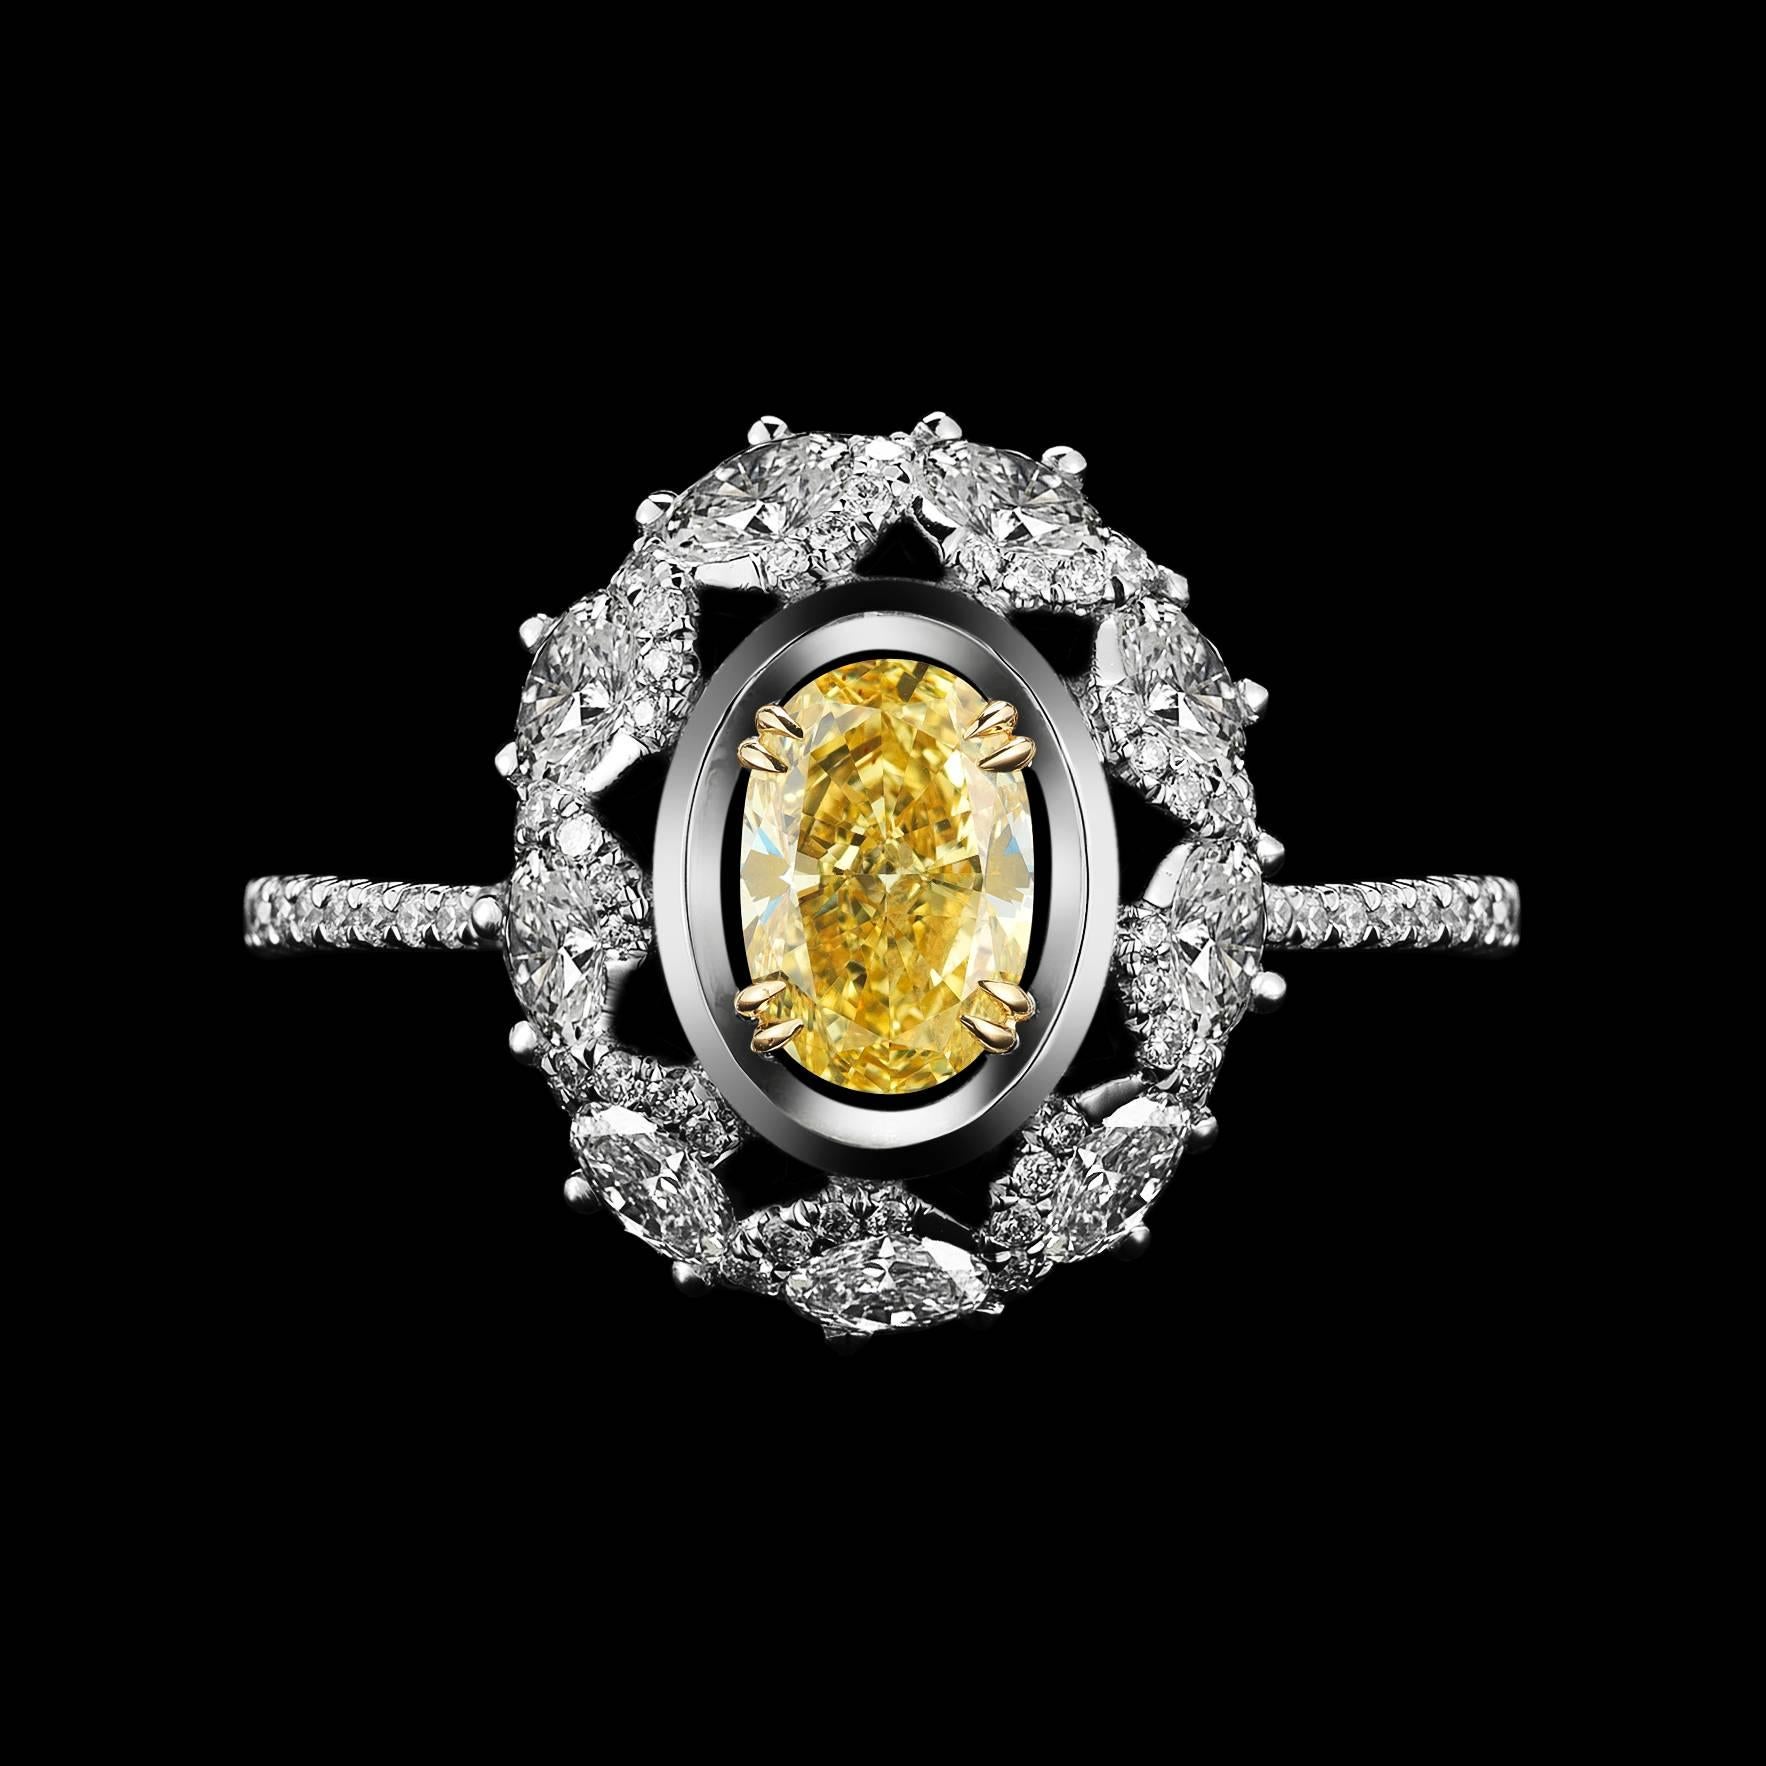 *This design is available with center diamonds weighing from 1ct - 10 cts and larger.  Please contact us for more information on this piece or on creating your own custom Alexandra Mor Design.  

An original Alexandra Mor Diamond ring comprised of a